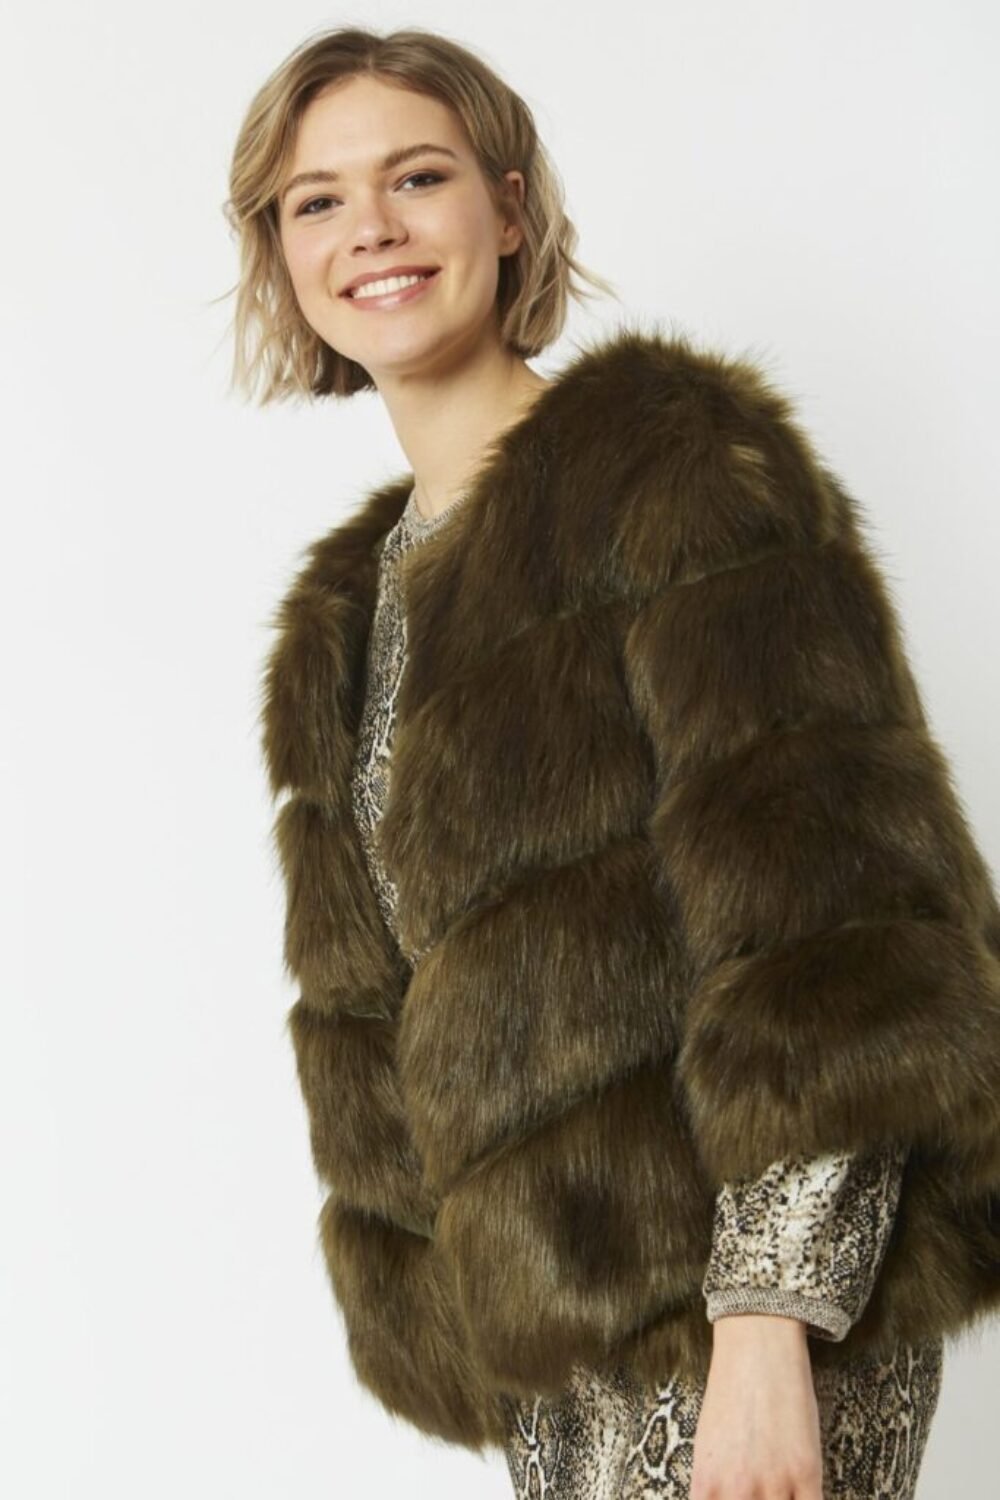 Shop Lux Green Faux Fur Ella Coat and women's luxury and designer clothes at www.lux-apparel.co.uk